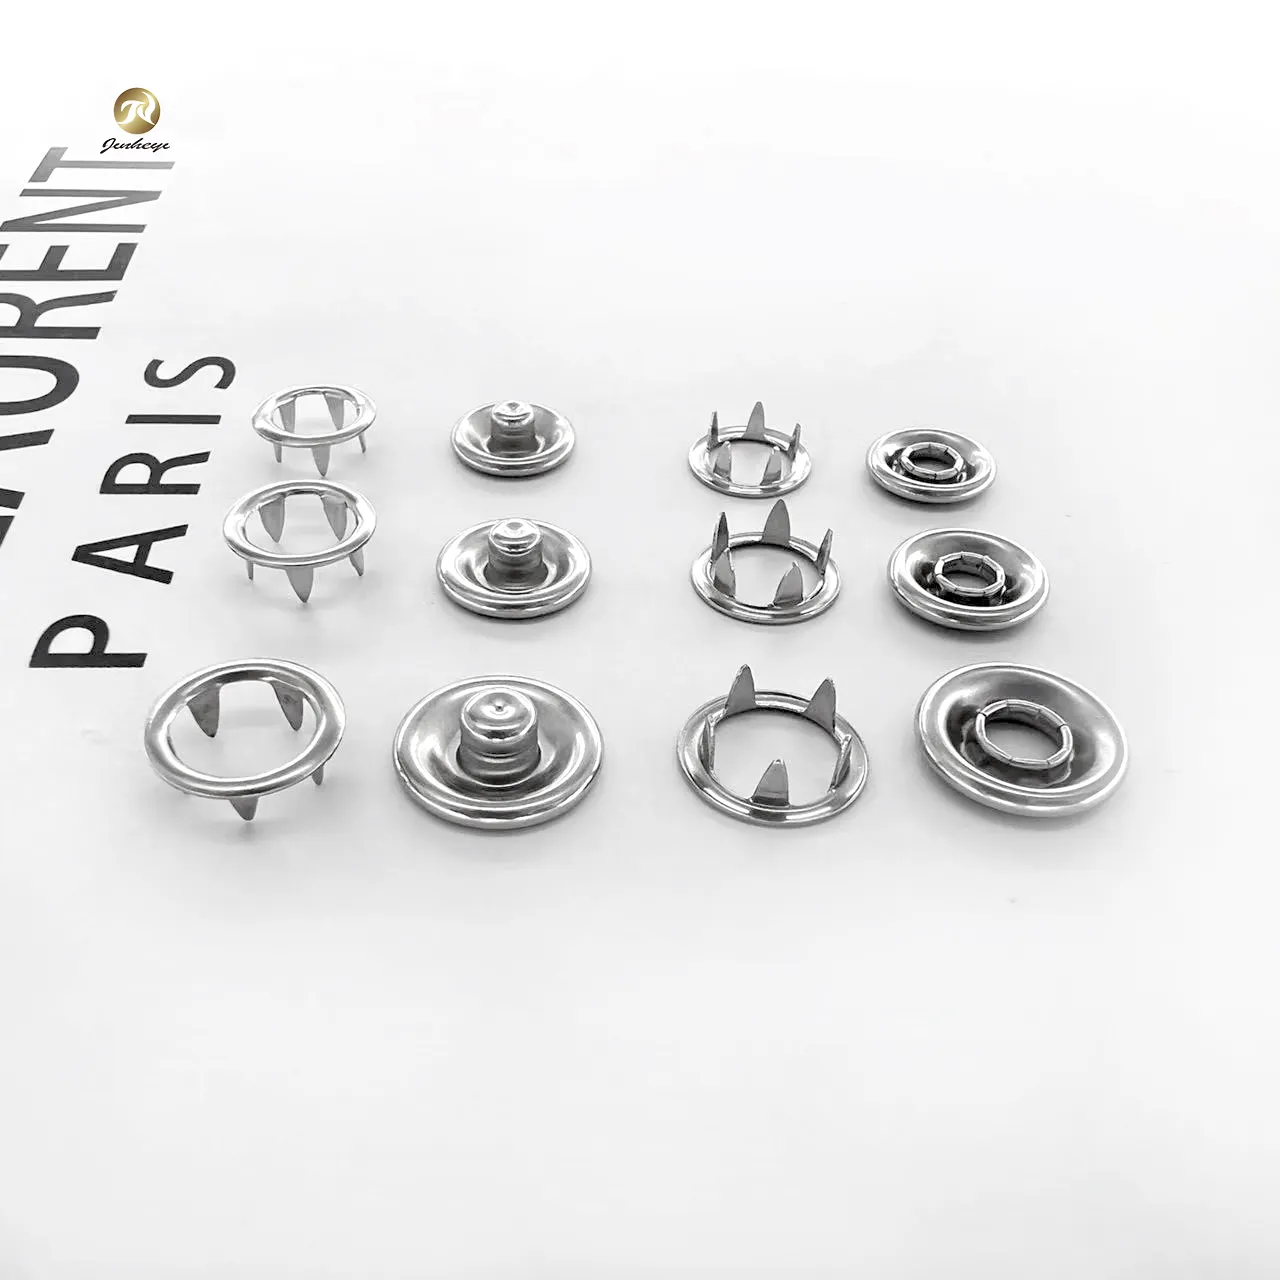 8 9.5 Mm Fahion Ring 4 Parts Prong Snap Button Stud Garment Five-Prong Snap Buttons for children clothing